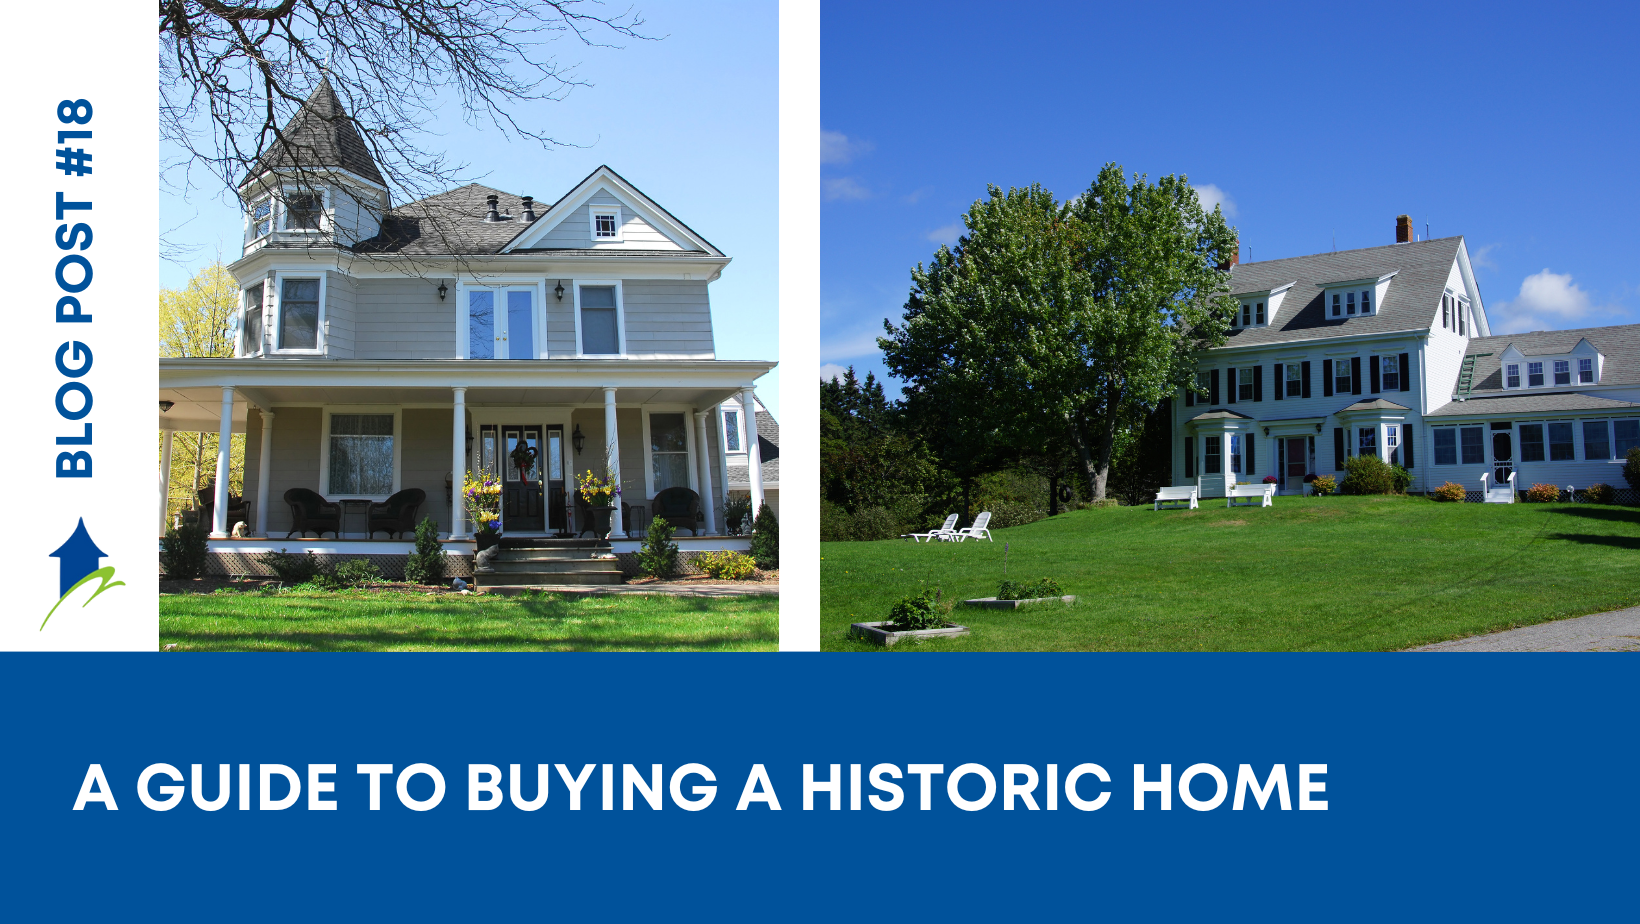 A Guide to Buying a Historic Home